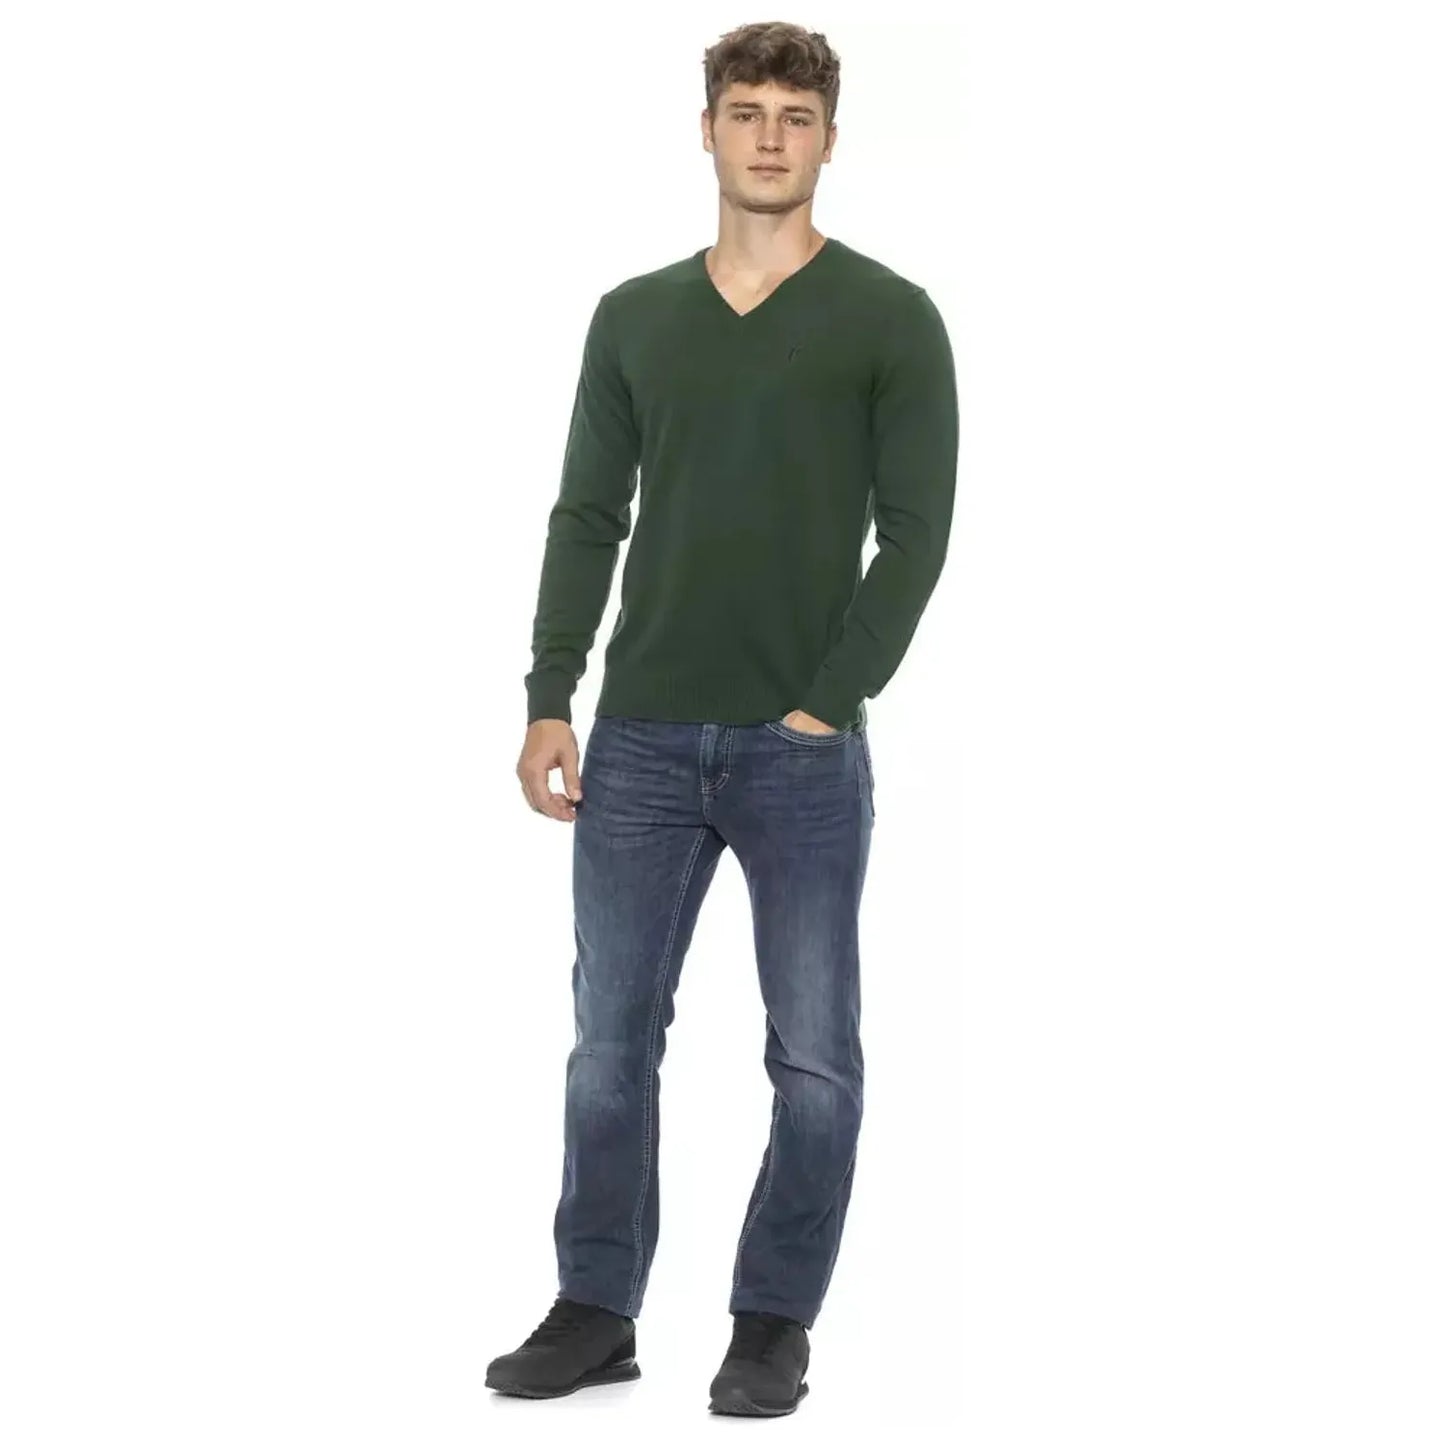 Conte of Florence Elegant Green V-Neck Men's Sweater green-sweater stock_product_image_19451_1483302145-17-91fc573d-3c7.webp